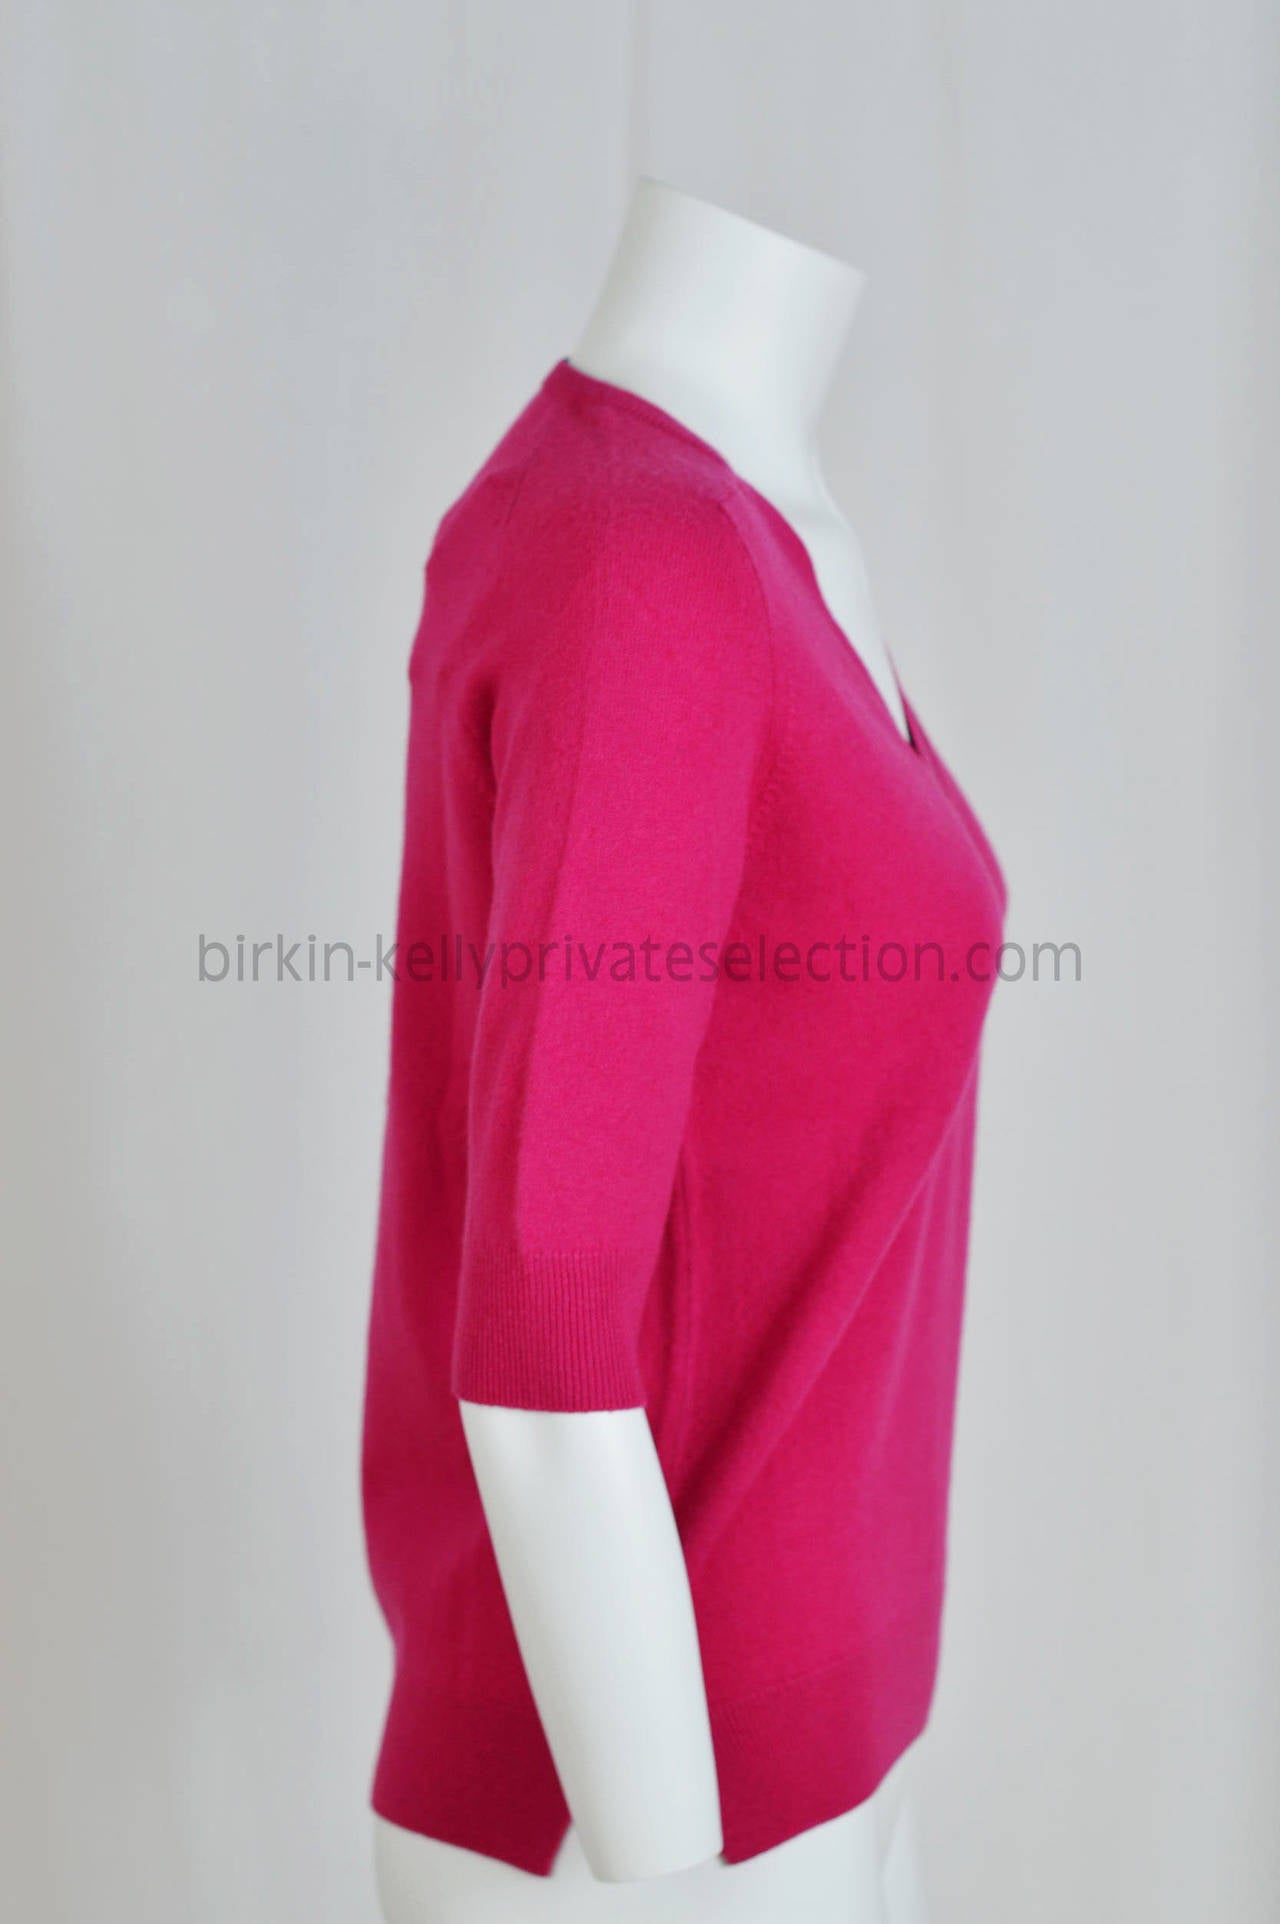 Hermes sweater COL V CACHEMIR 36 ECOSSAIS BICOLORE MAGENTA 2015.

Pre-owned and never used.

Bought it in hermes store in 2015.

Size; 36.

Color; BICOLORE MAGENTA.

Model; Col V Ecossais.

-Original Invoice.

-Shipment and Insurance,